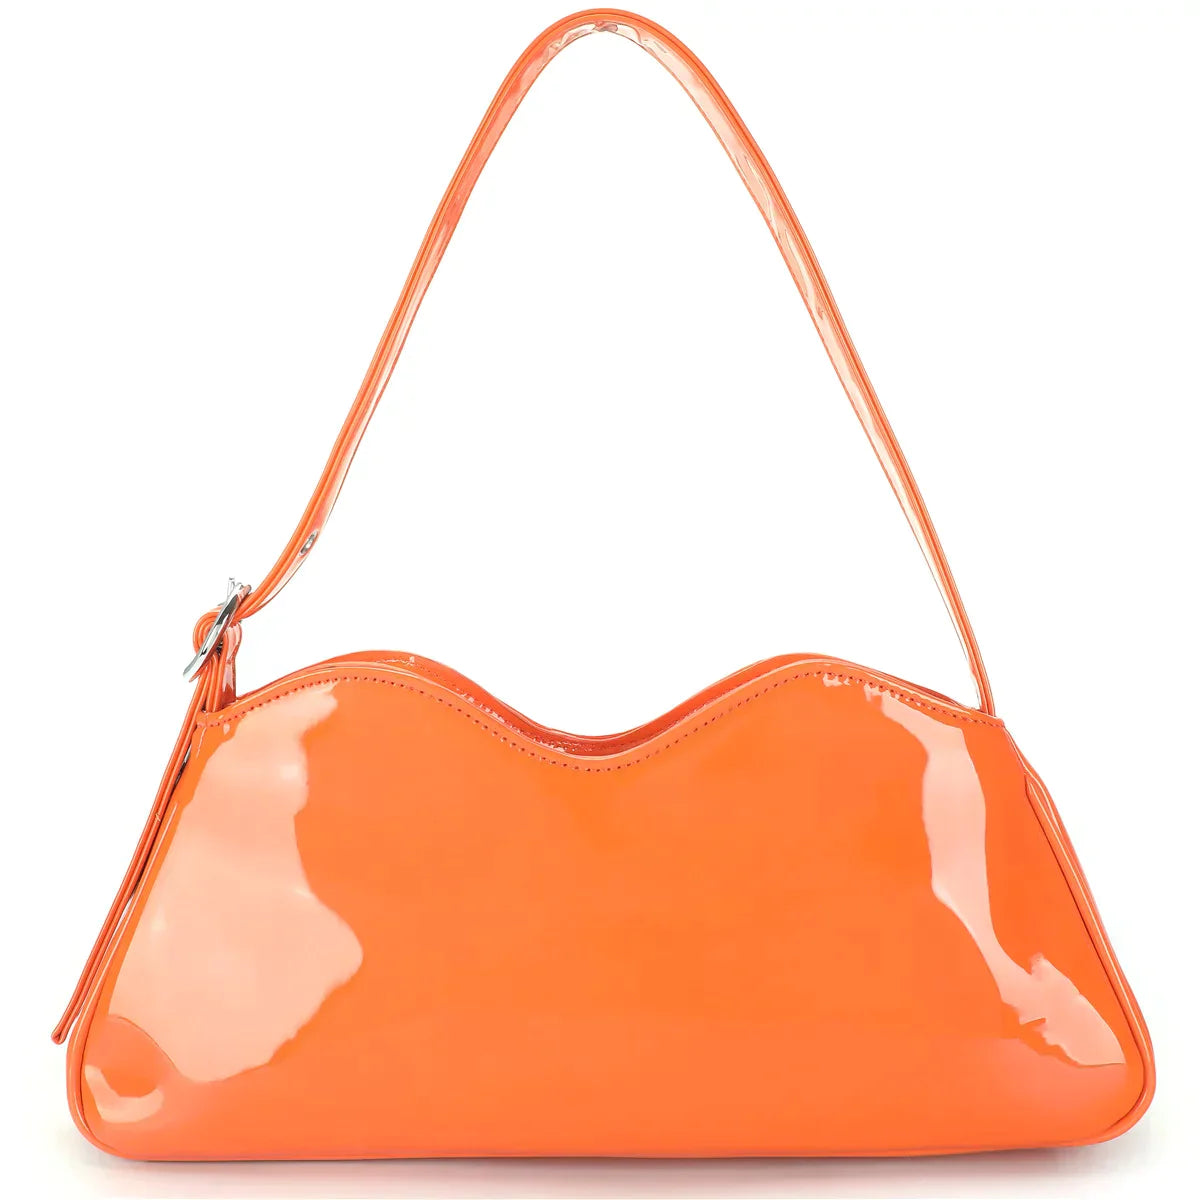 GRACE SHOULDER BAG - FLAME ORANGE - EXCLUSIVE Bags from SILFEN - Just €63! SHOP NOW AT IAMINHATELOVE BOTH IN STORE FOR CYPRUS AND ONLINE WORLDWIDE @ IAMINHATELOVE.COM